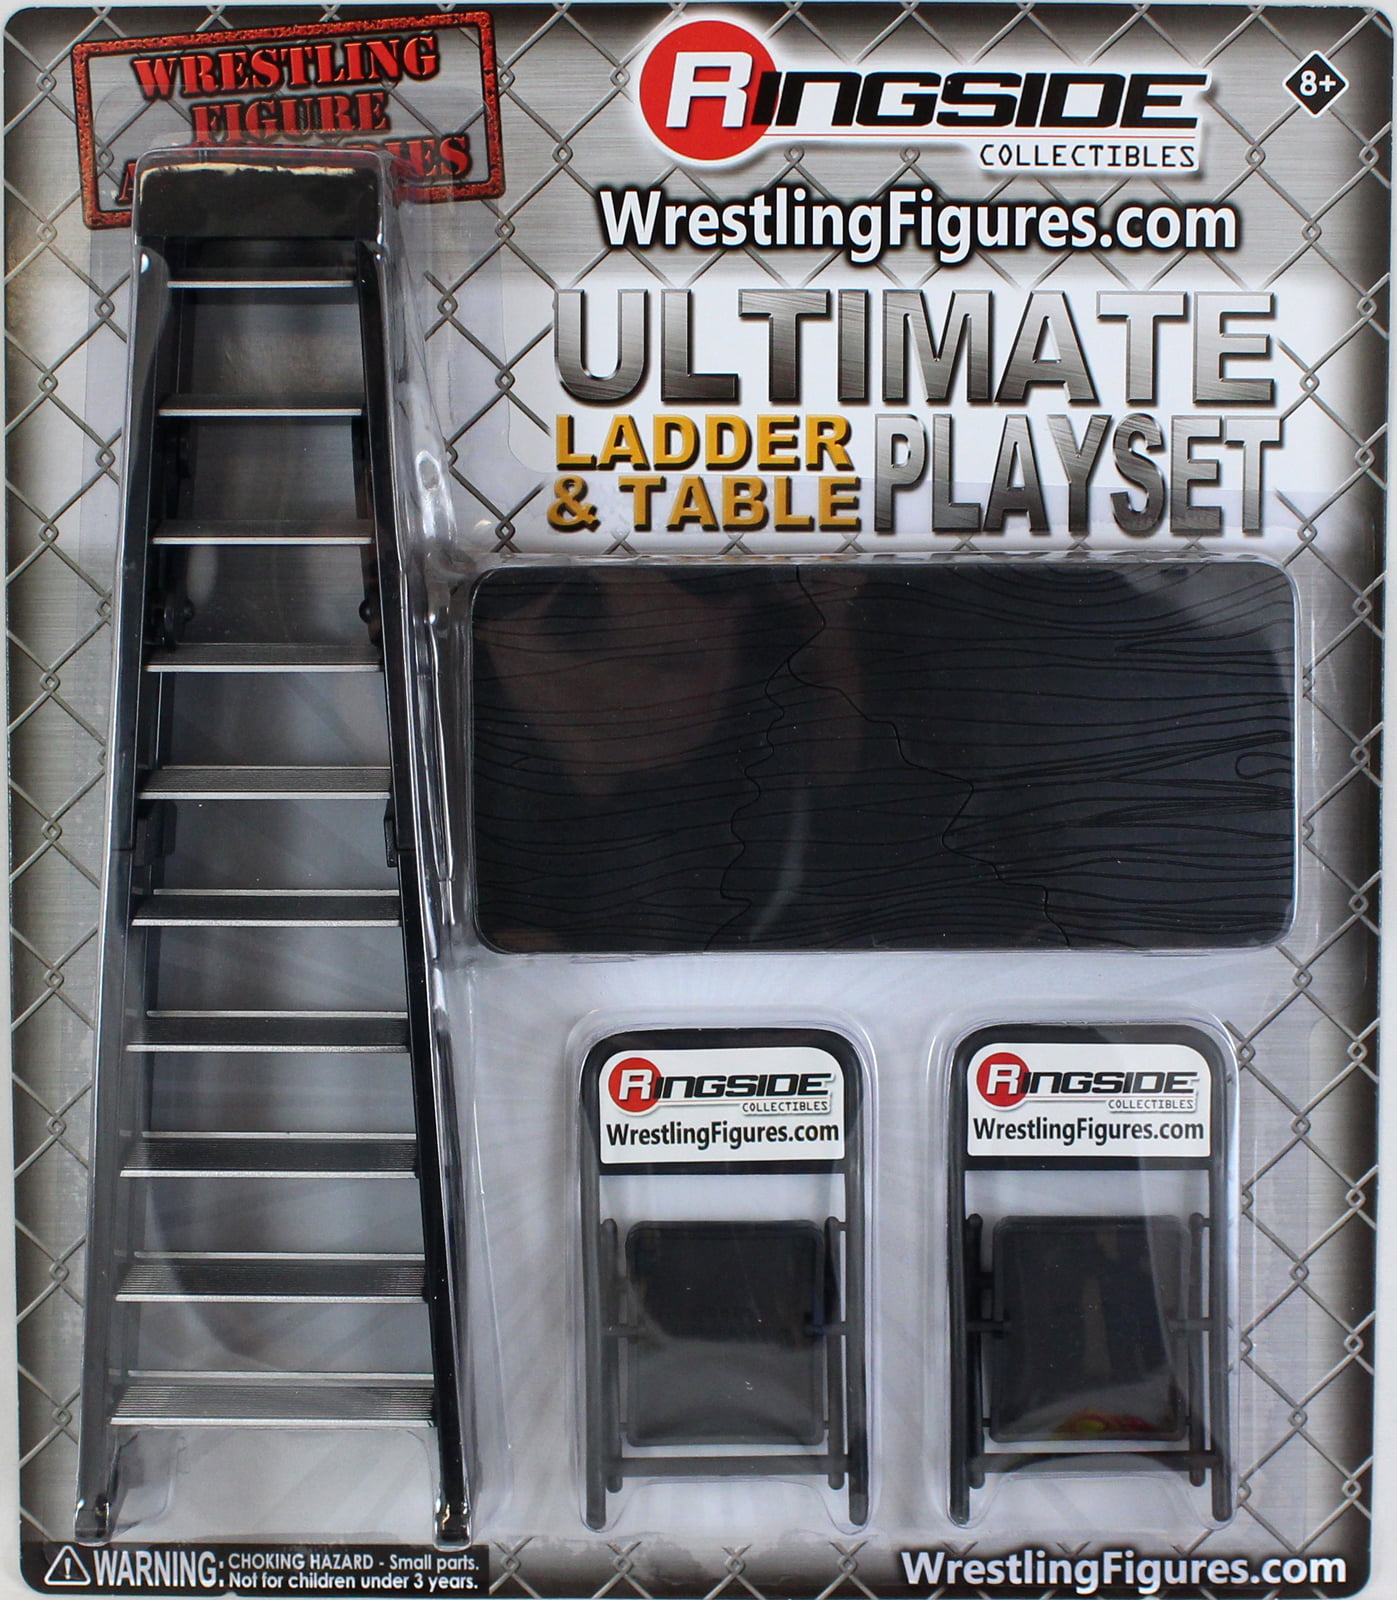 WWE Red Commentators Playset Ringside Exclusive Wrestling Figure Accessories 